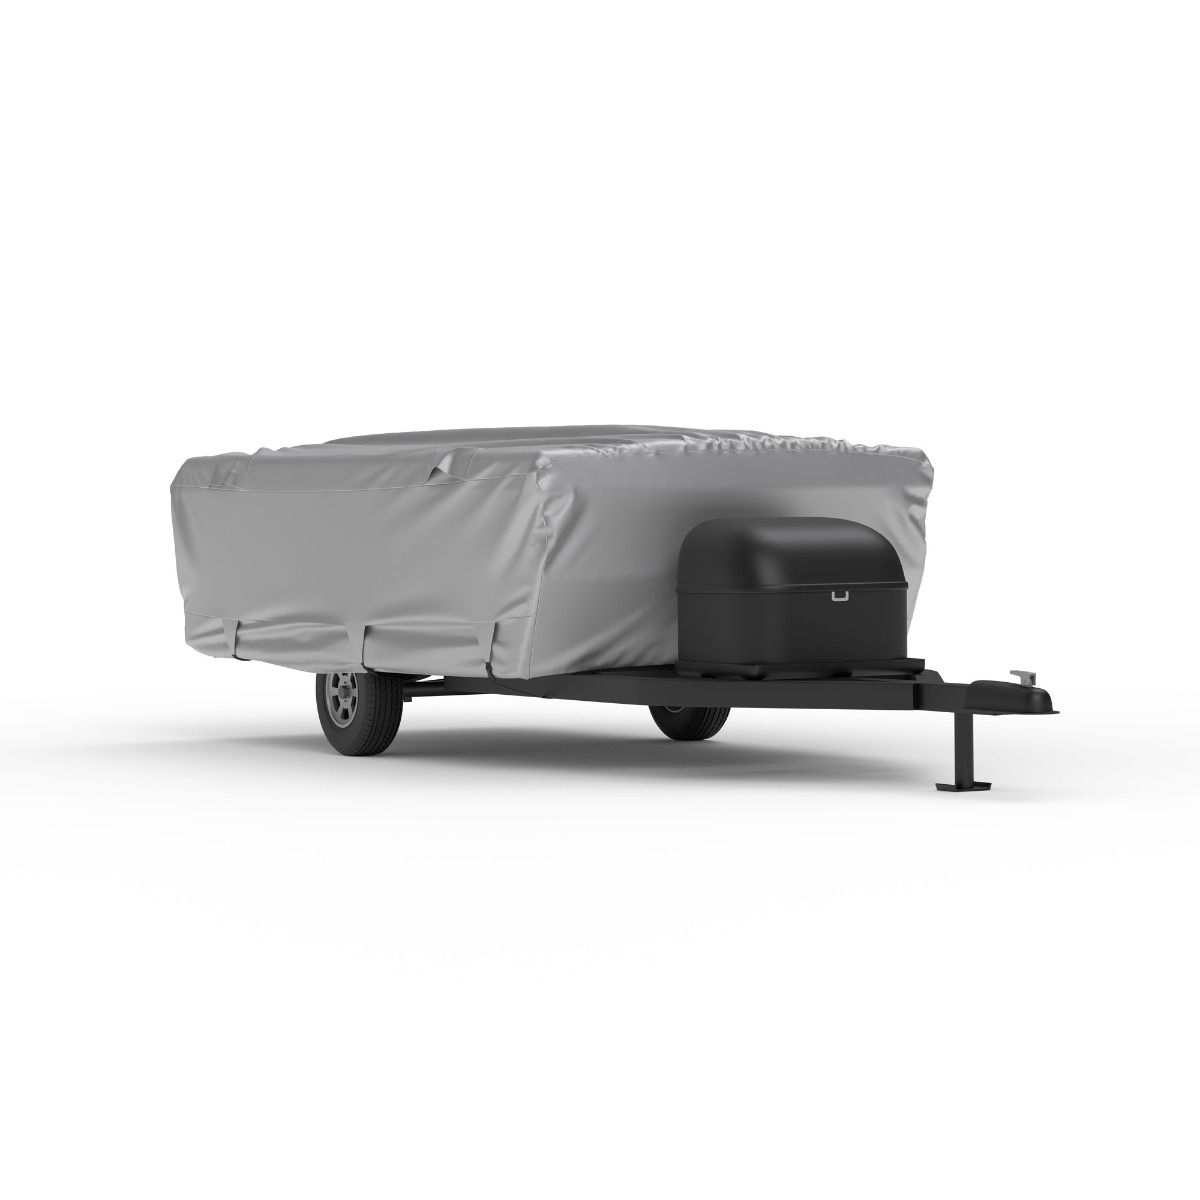 Platinum Shield Folding RV Camping Trailer Cover (Fits 14' to 16' Long)